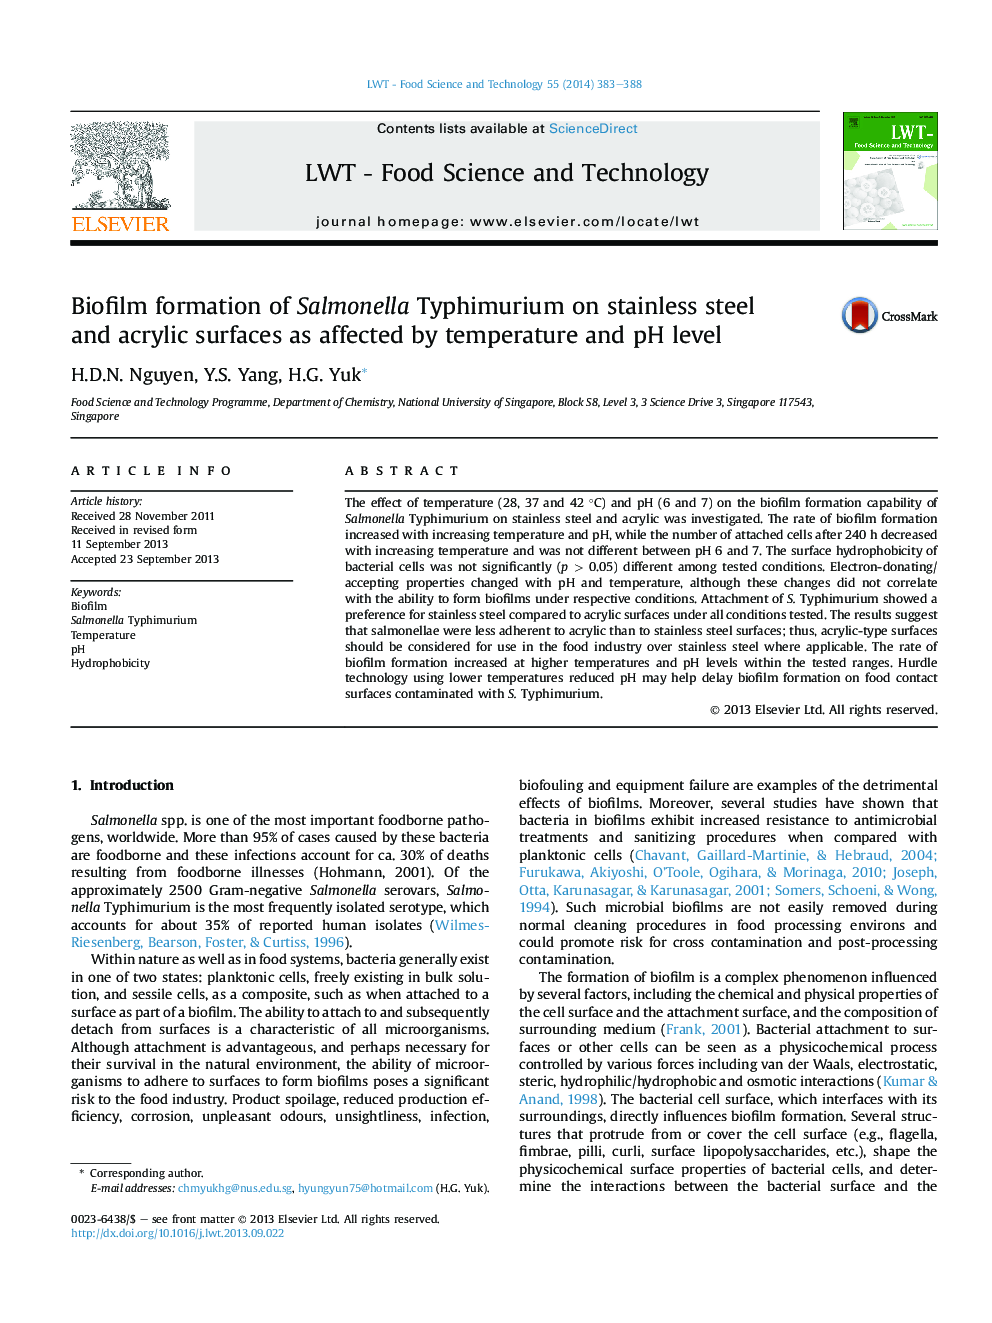 Biofilm formation of Salmonella Typhimurium on stainless steel and acrylic surfaces as affected by temperature and pH level